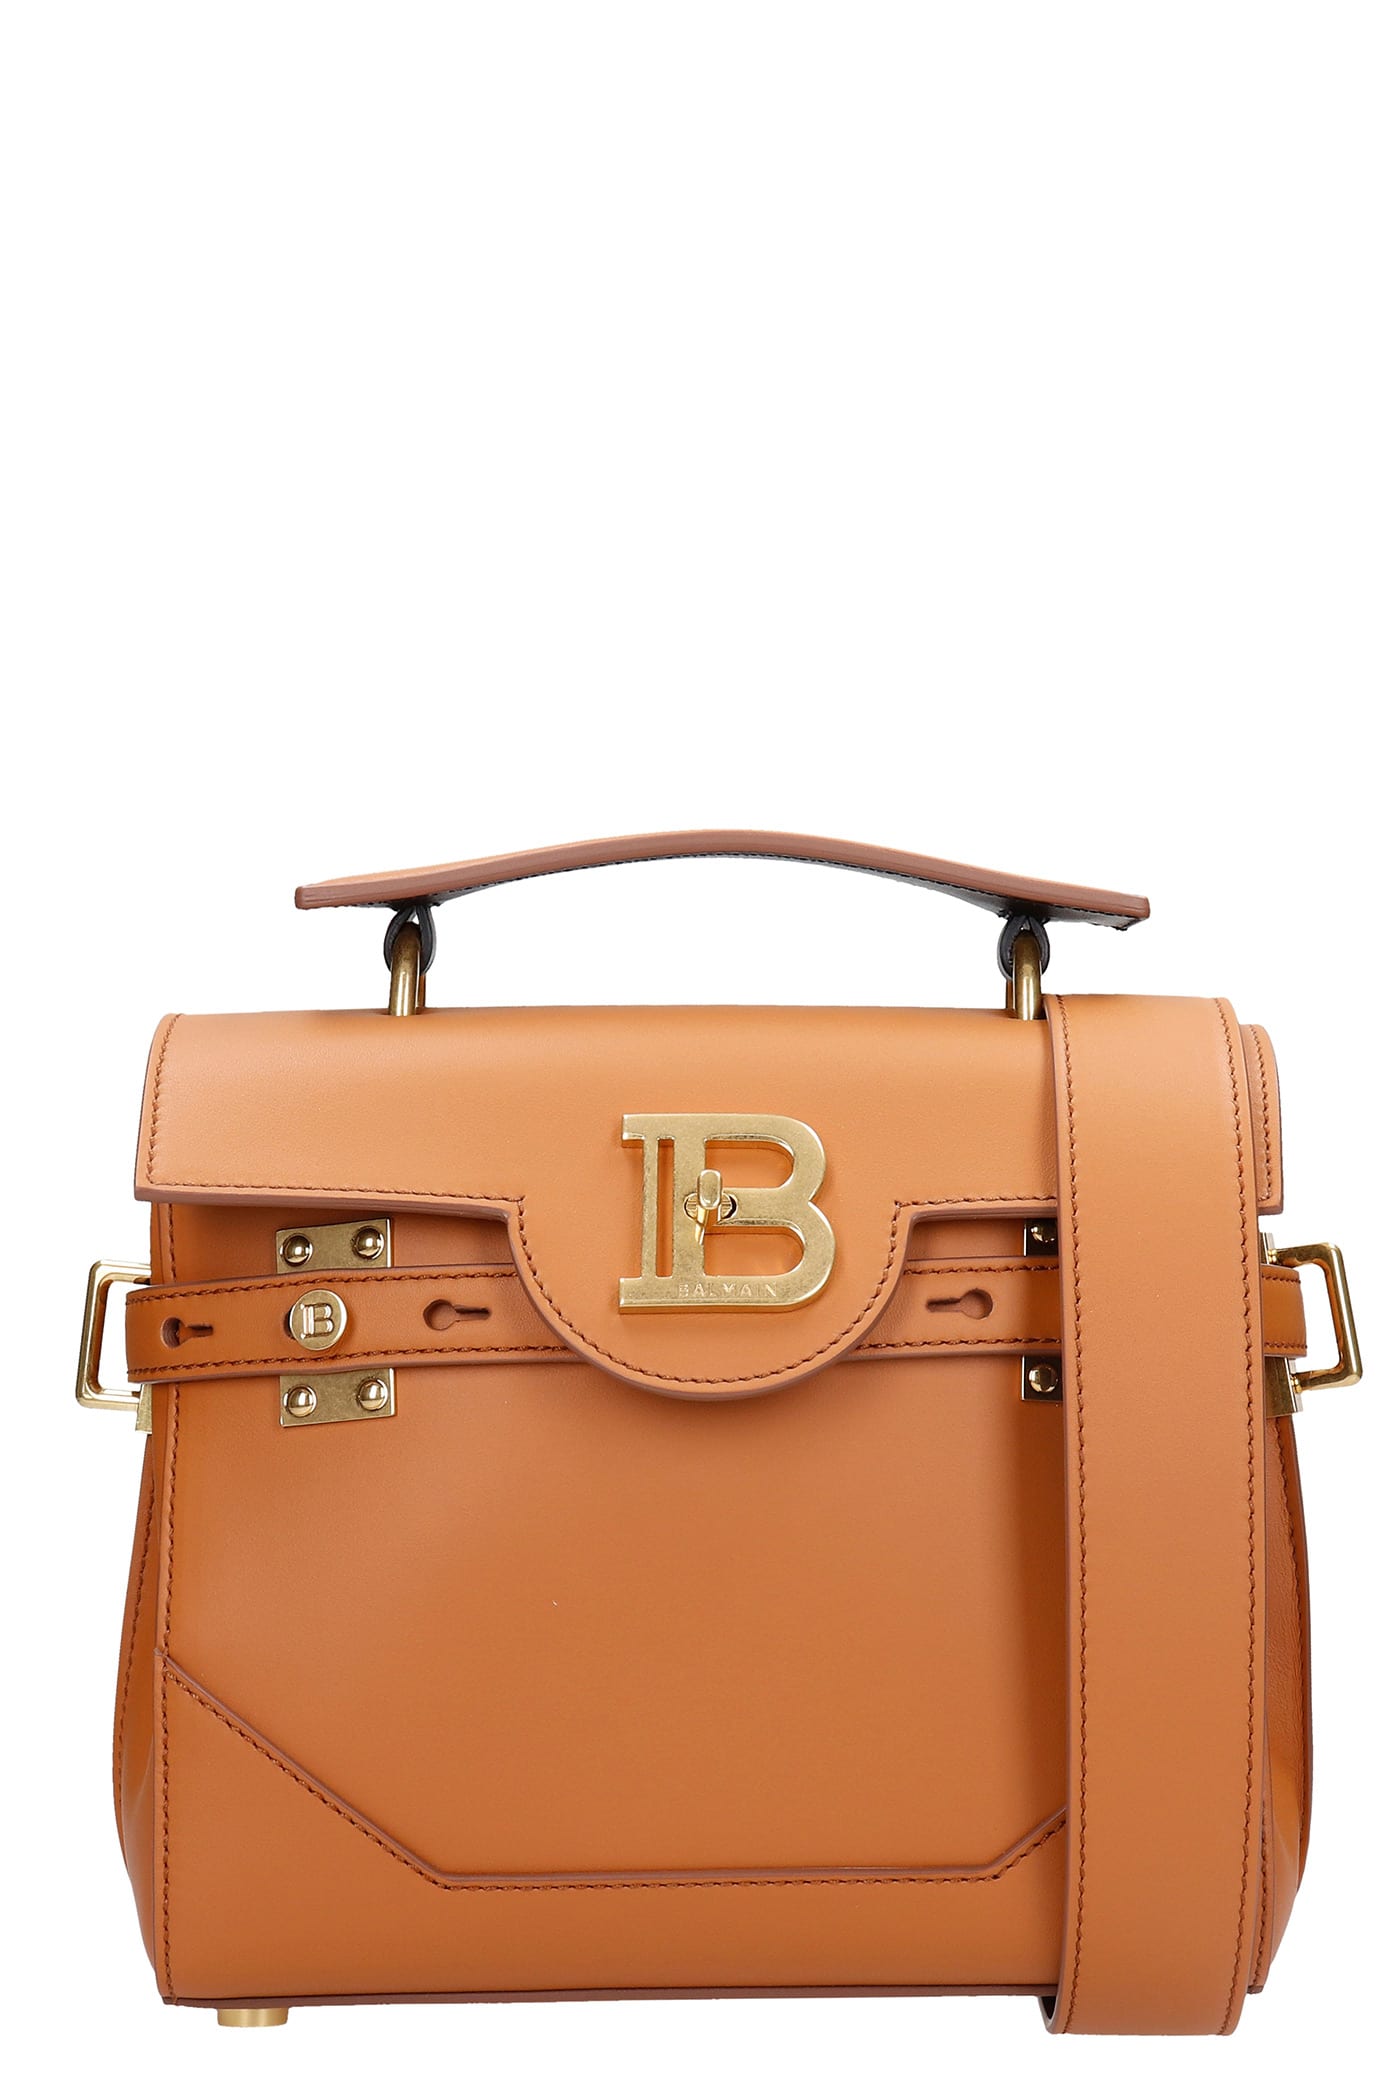 Balmain Hand Bag In Leather Color Leather